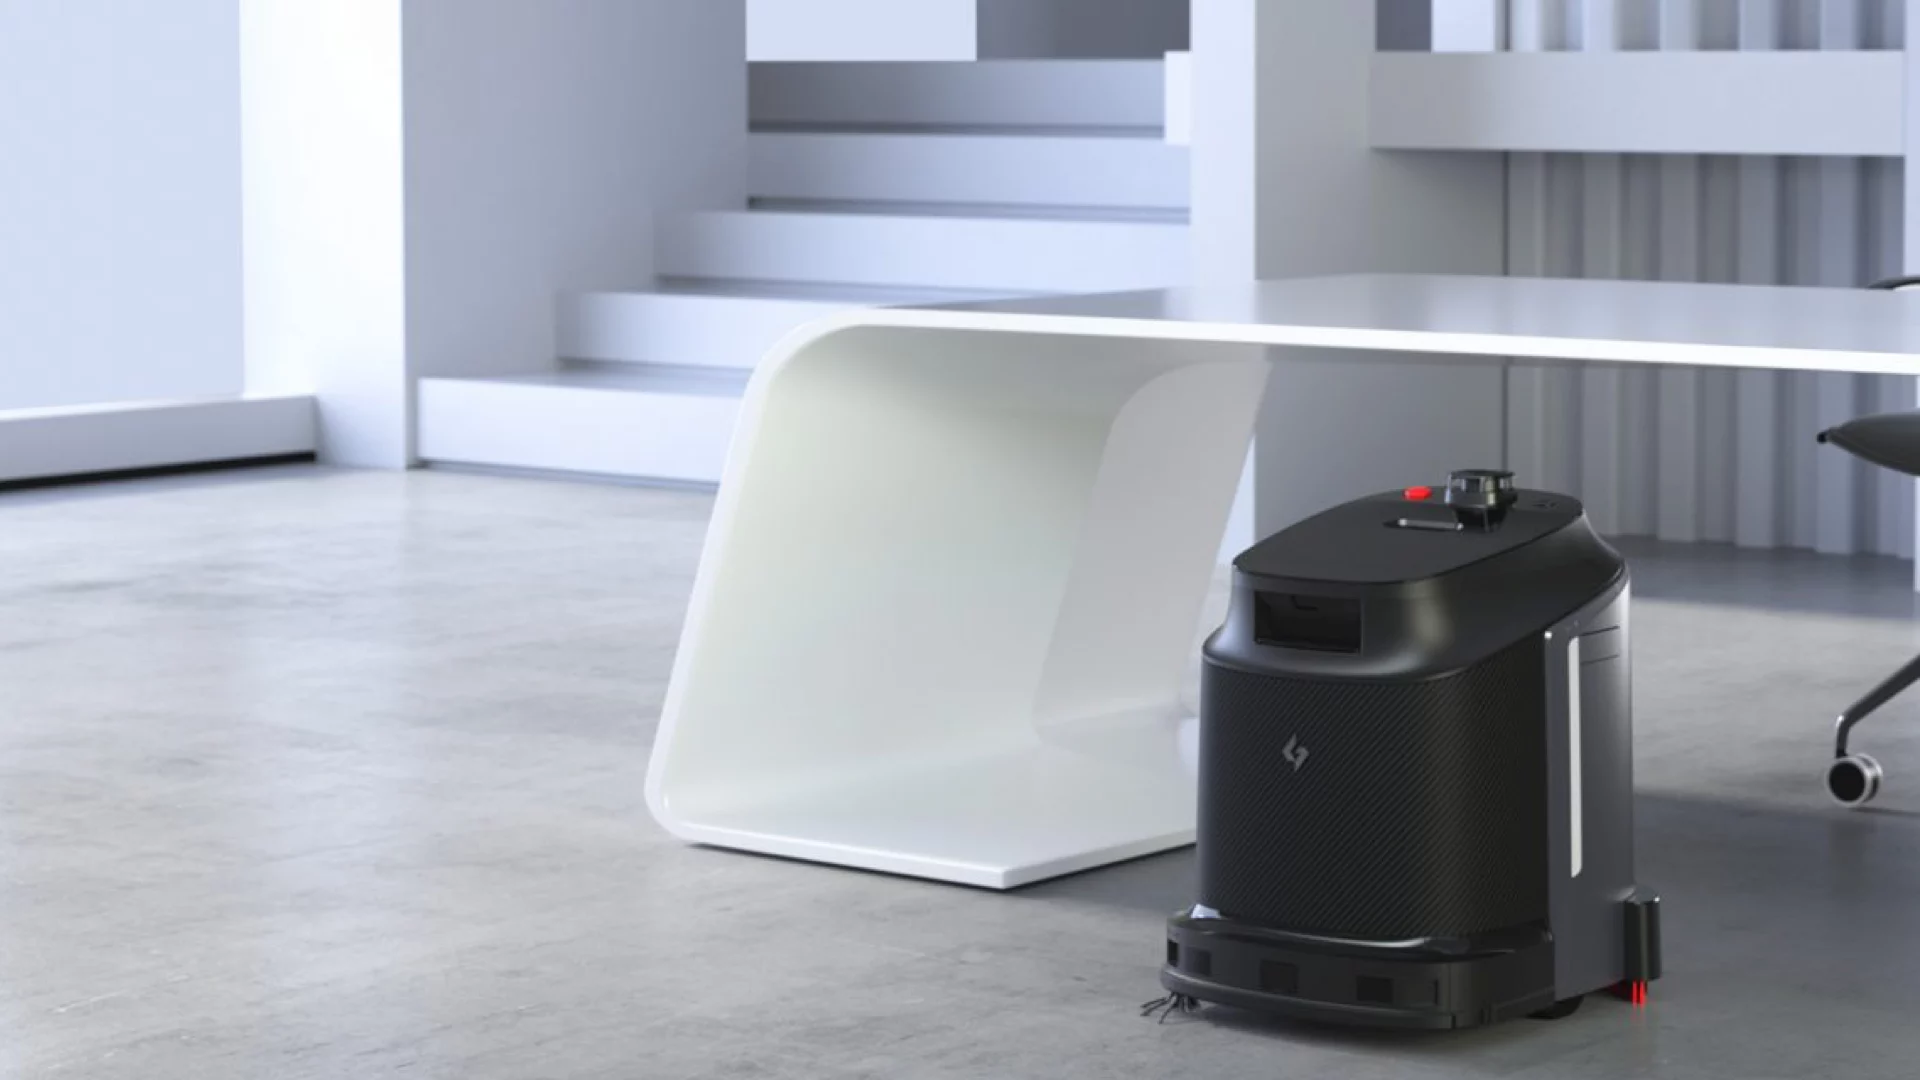 Cleaning robot in an office